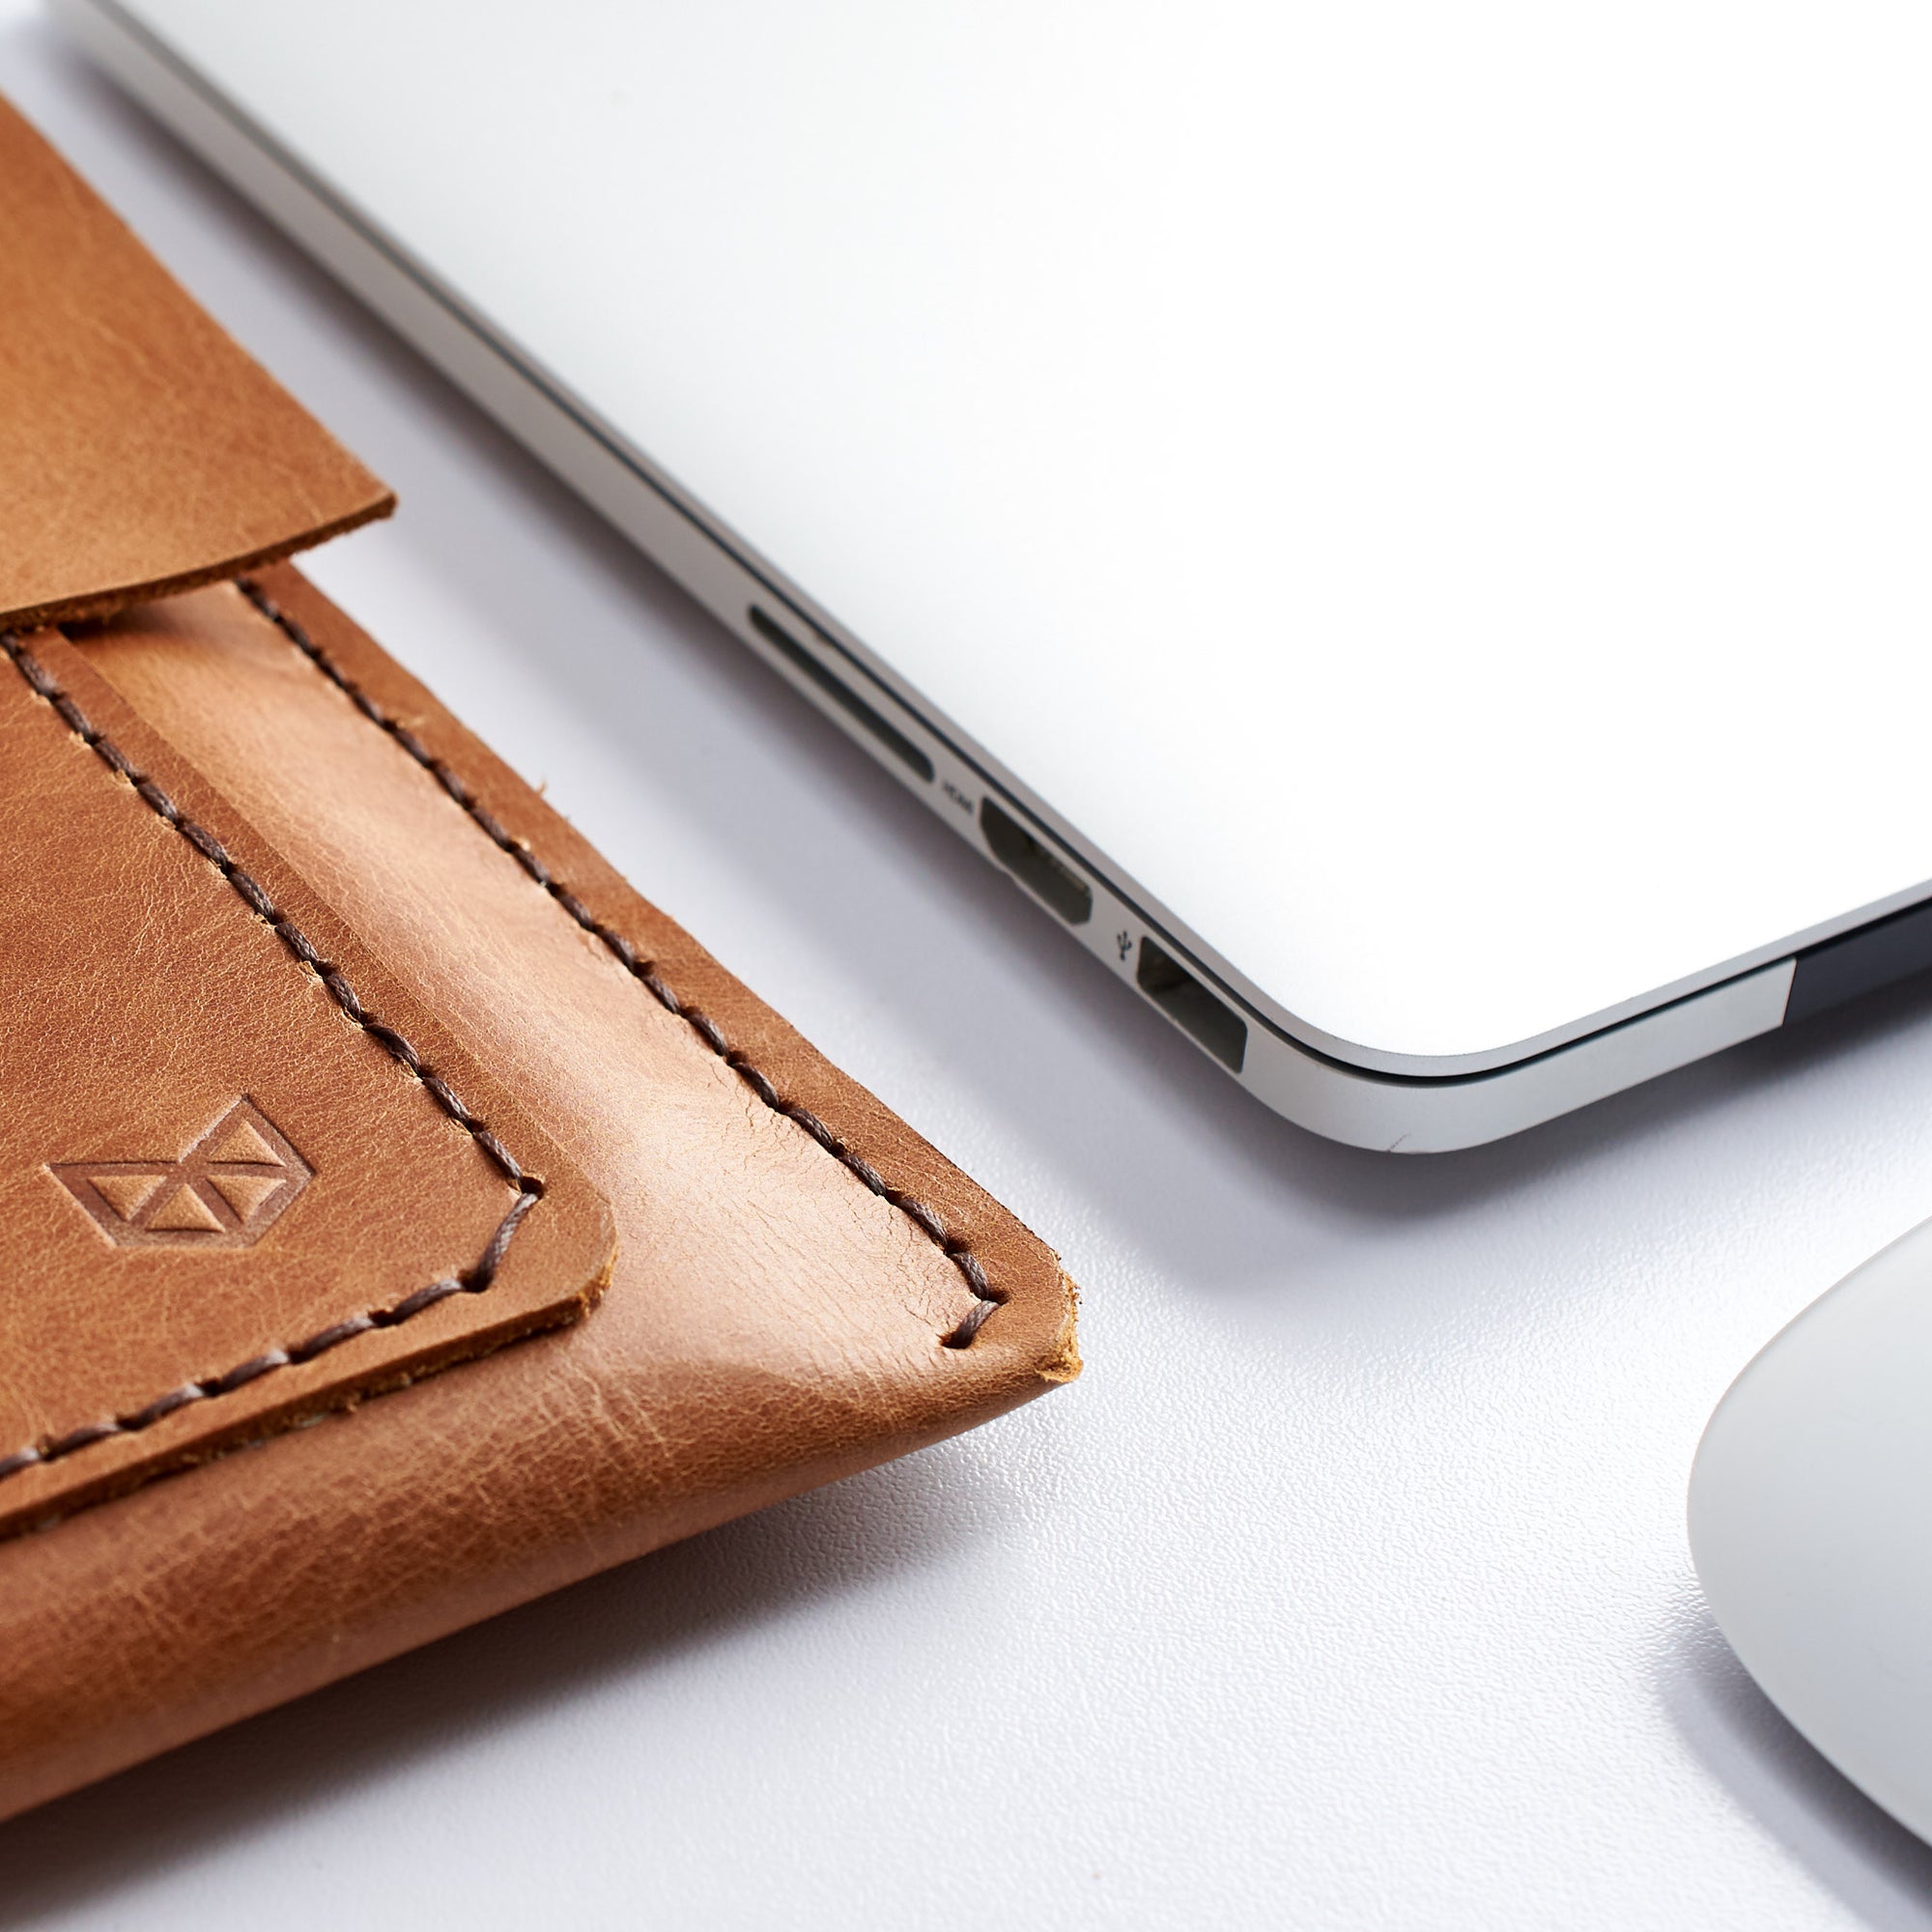 Stitch Detail. Tan Leather MacBook Case. Postman MacBook Sleeve by Capra Leather